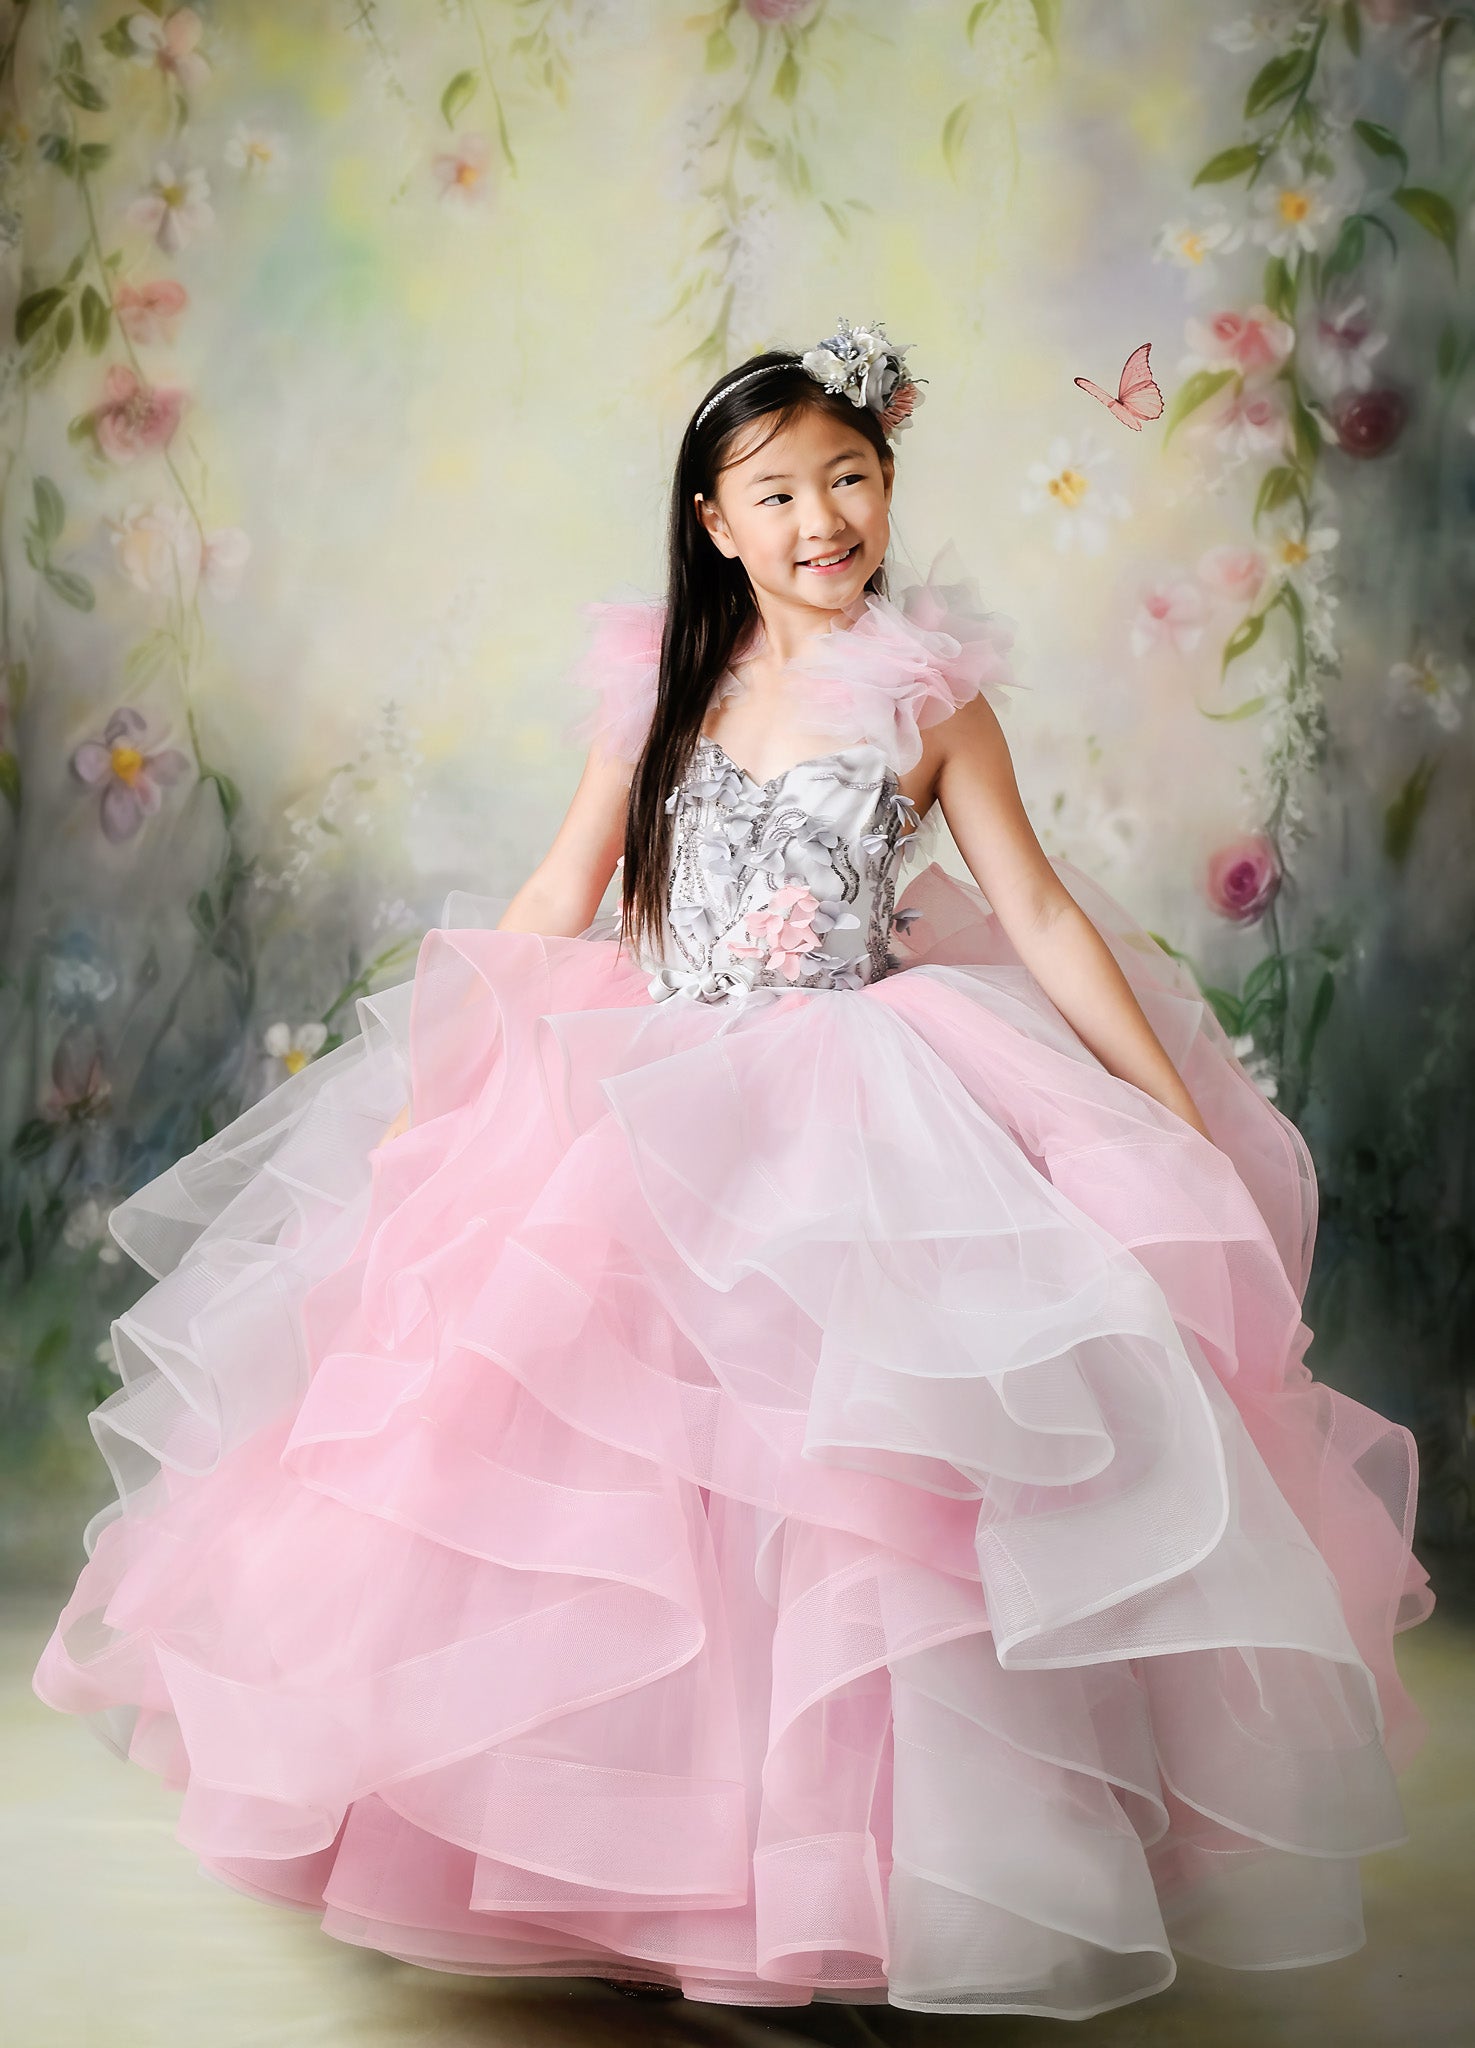 Floor long girls rental gown. Detachable removable tulle skirt: Rental gowns for photography sessions and events, girls high low gown. Bentley and Lace Rentals and custom gowns.